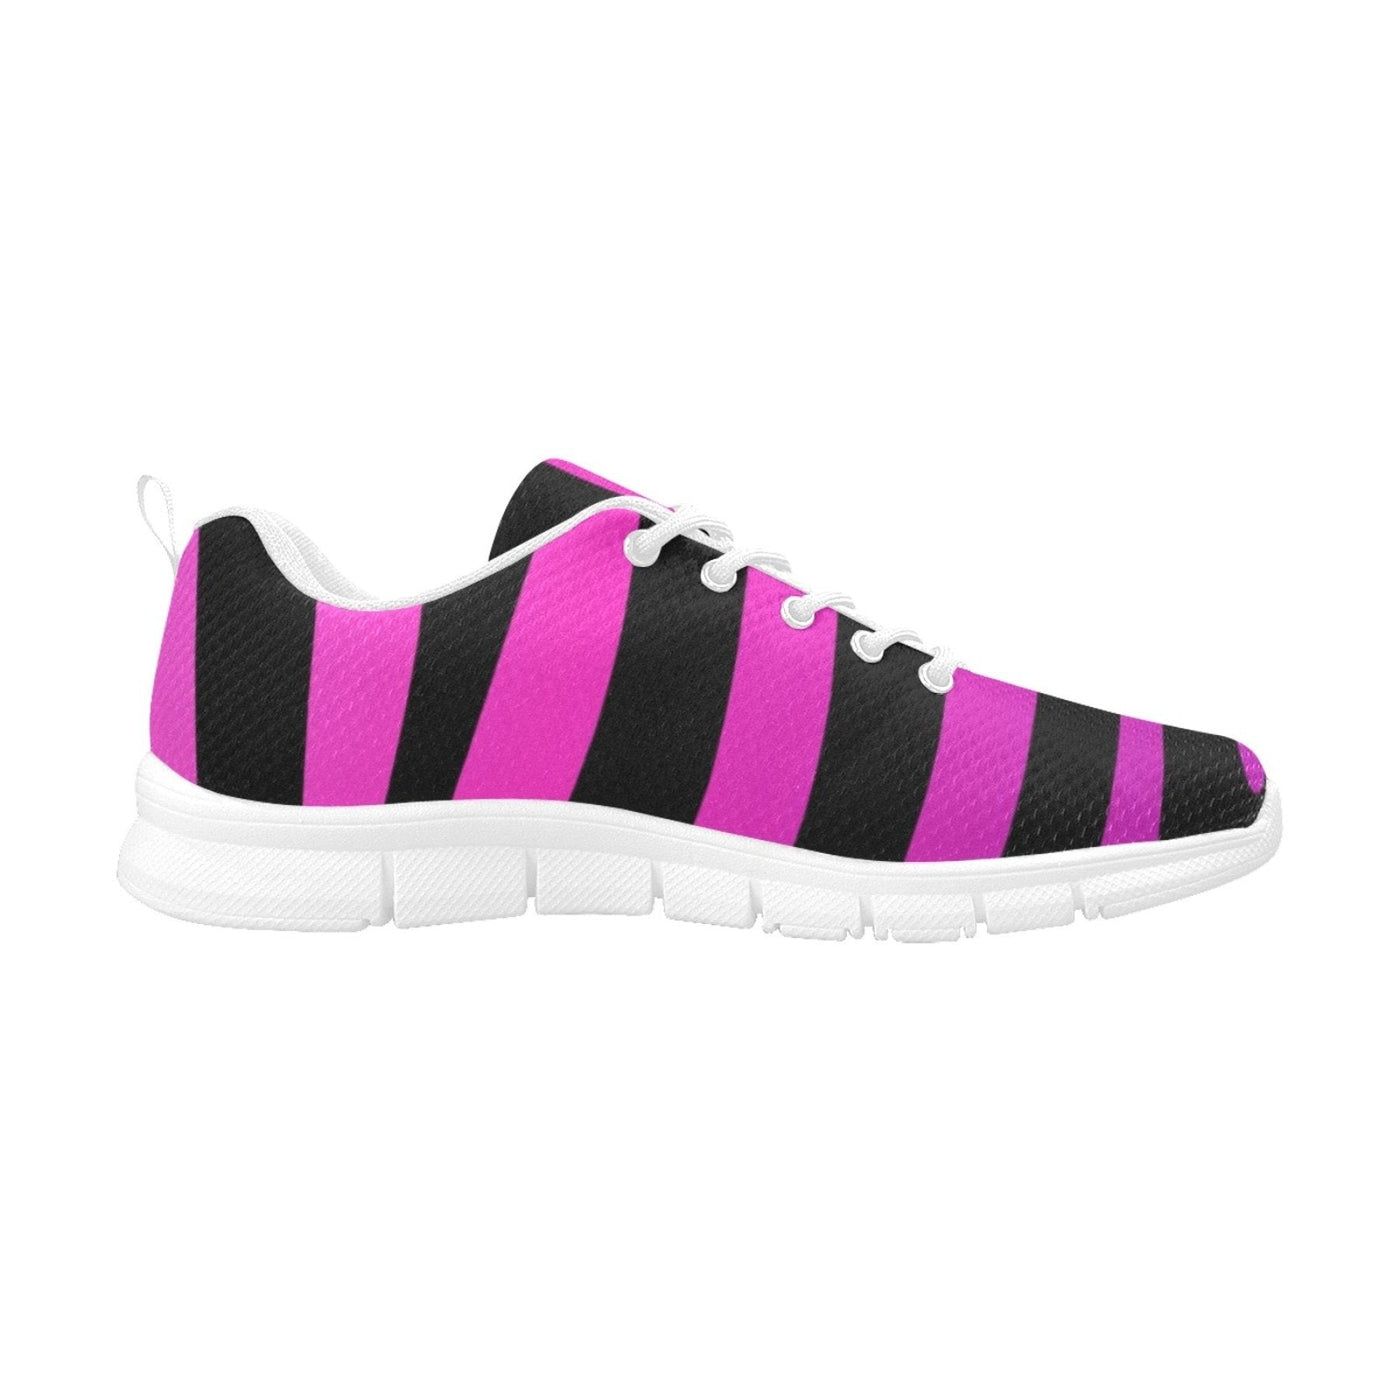 Womens Sneakers Black Strip And Purple Running Shoes - Womens | Sneakers |